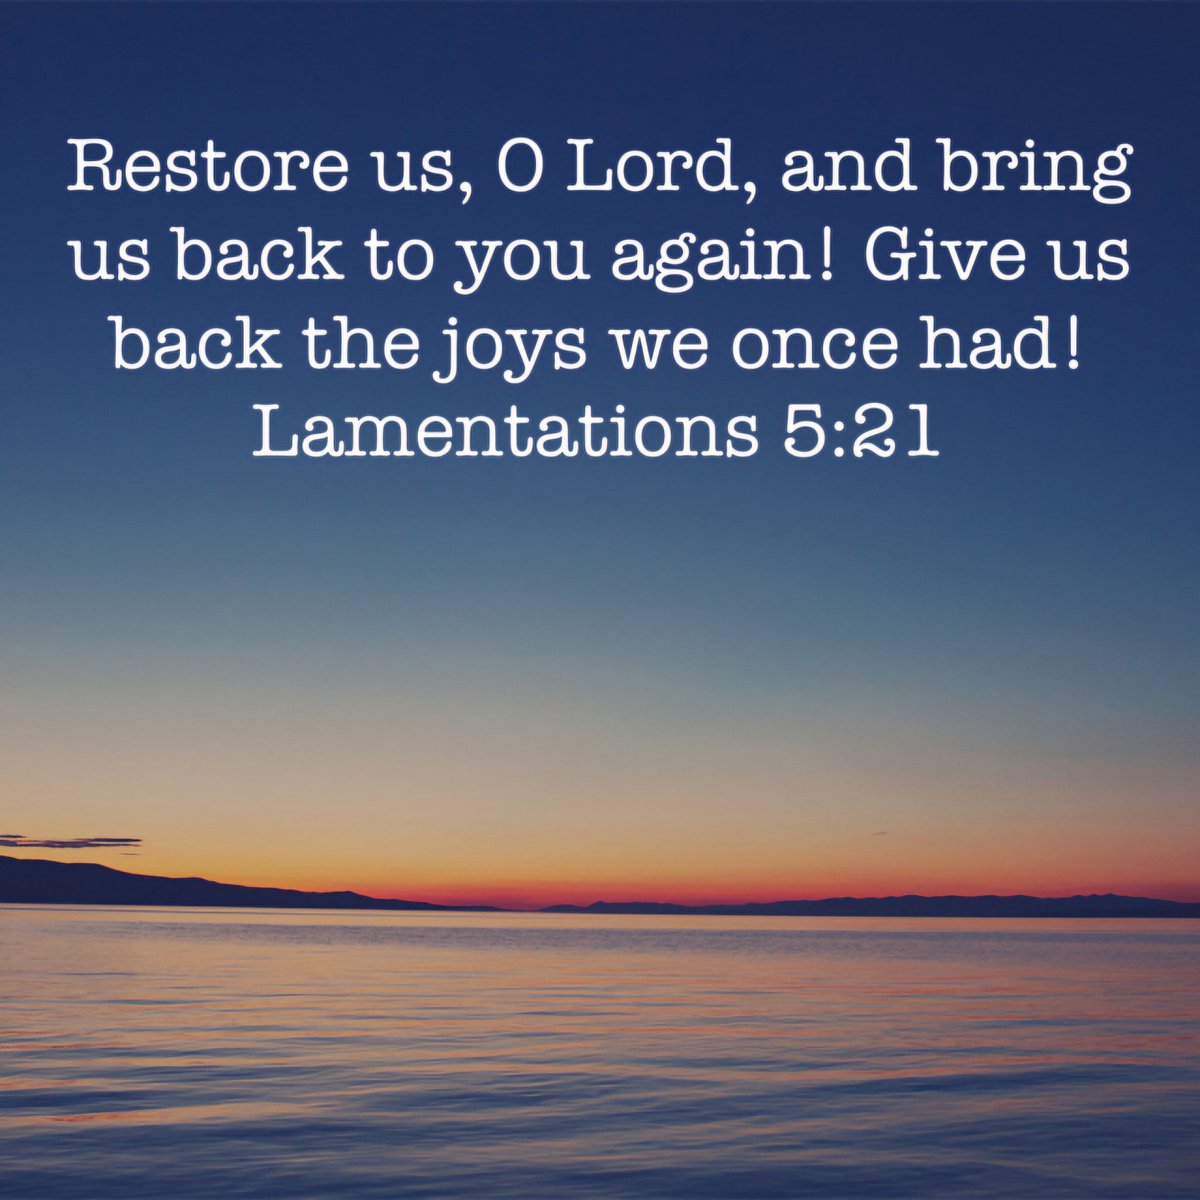 Restore us, O Lord, and bring us back to you again. Amen.